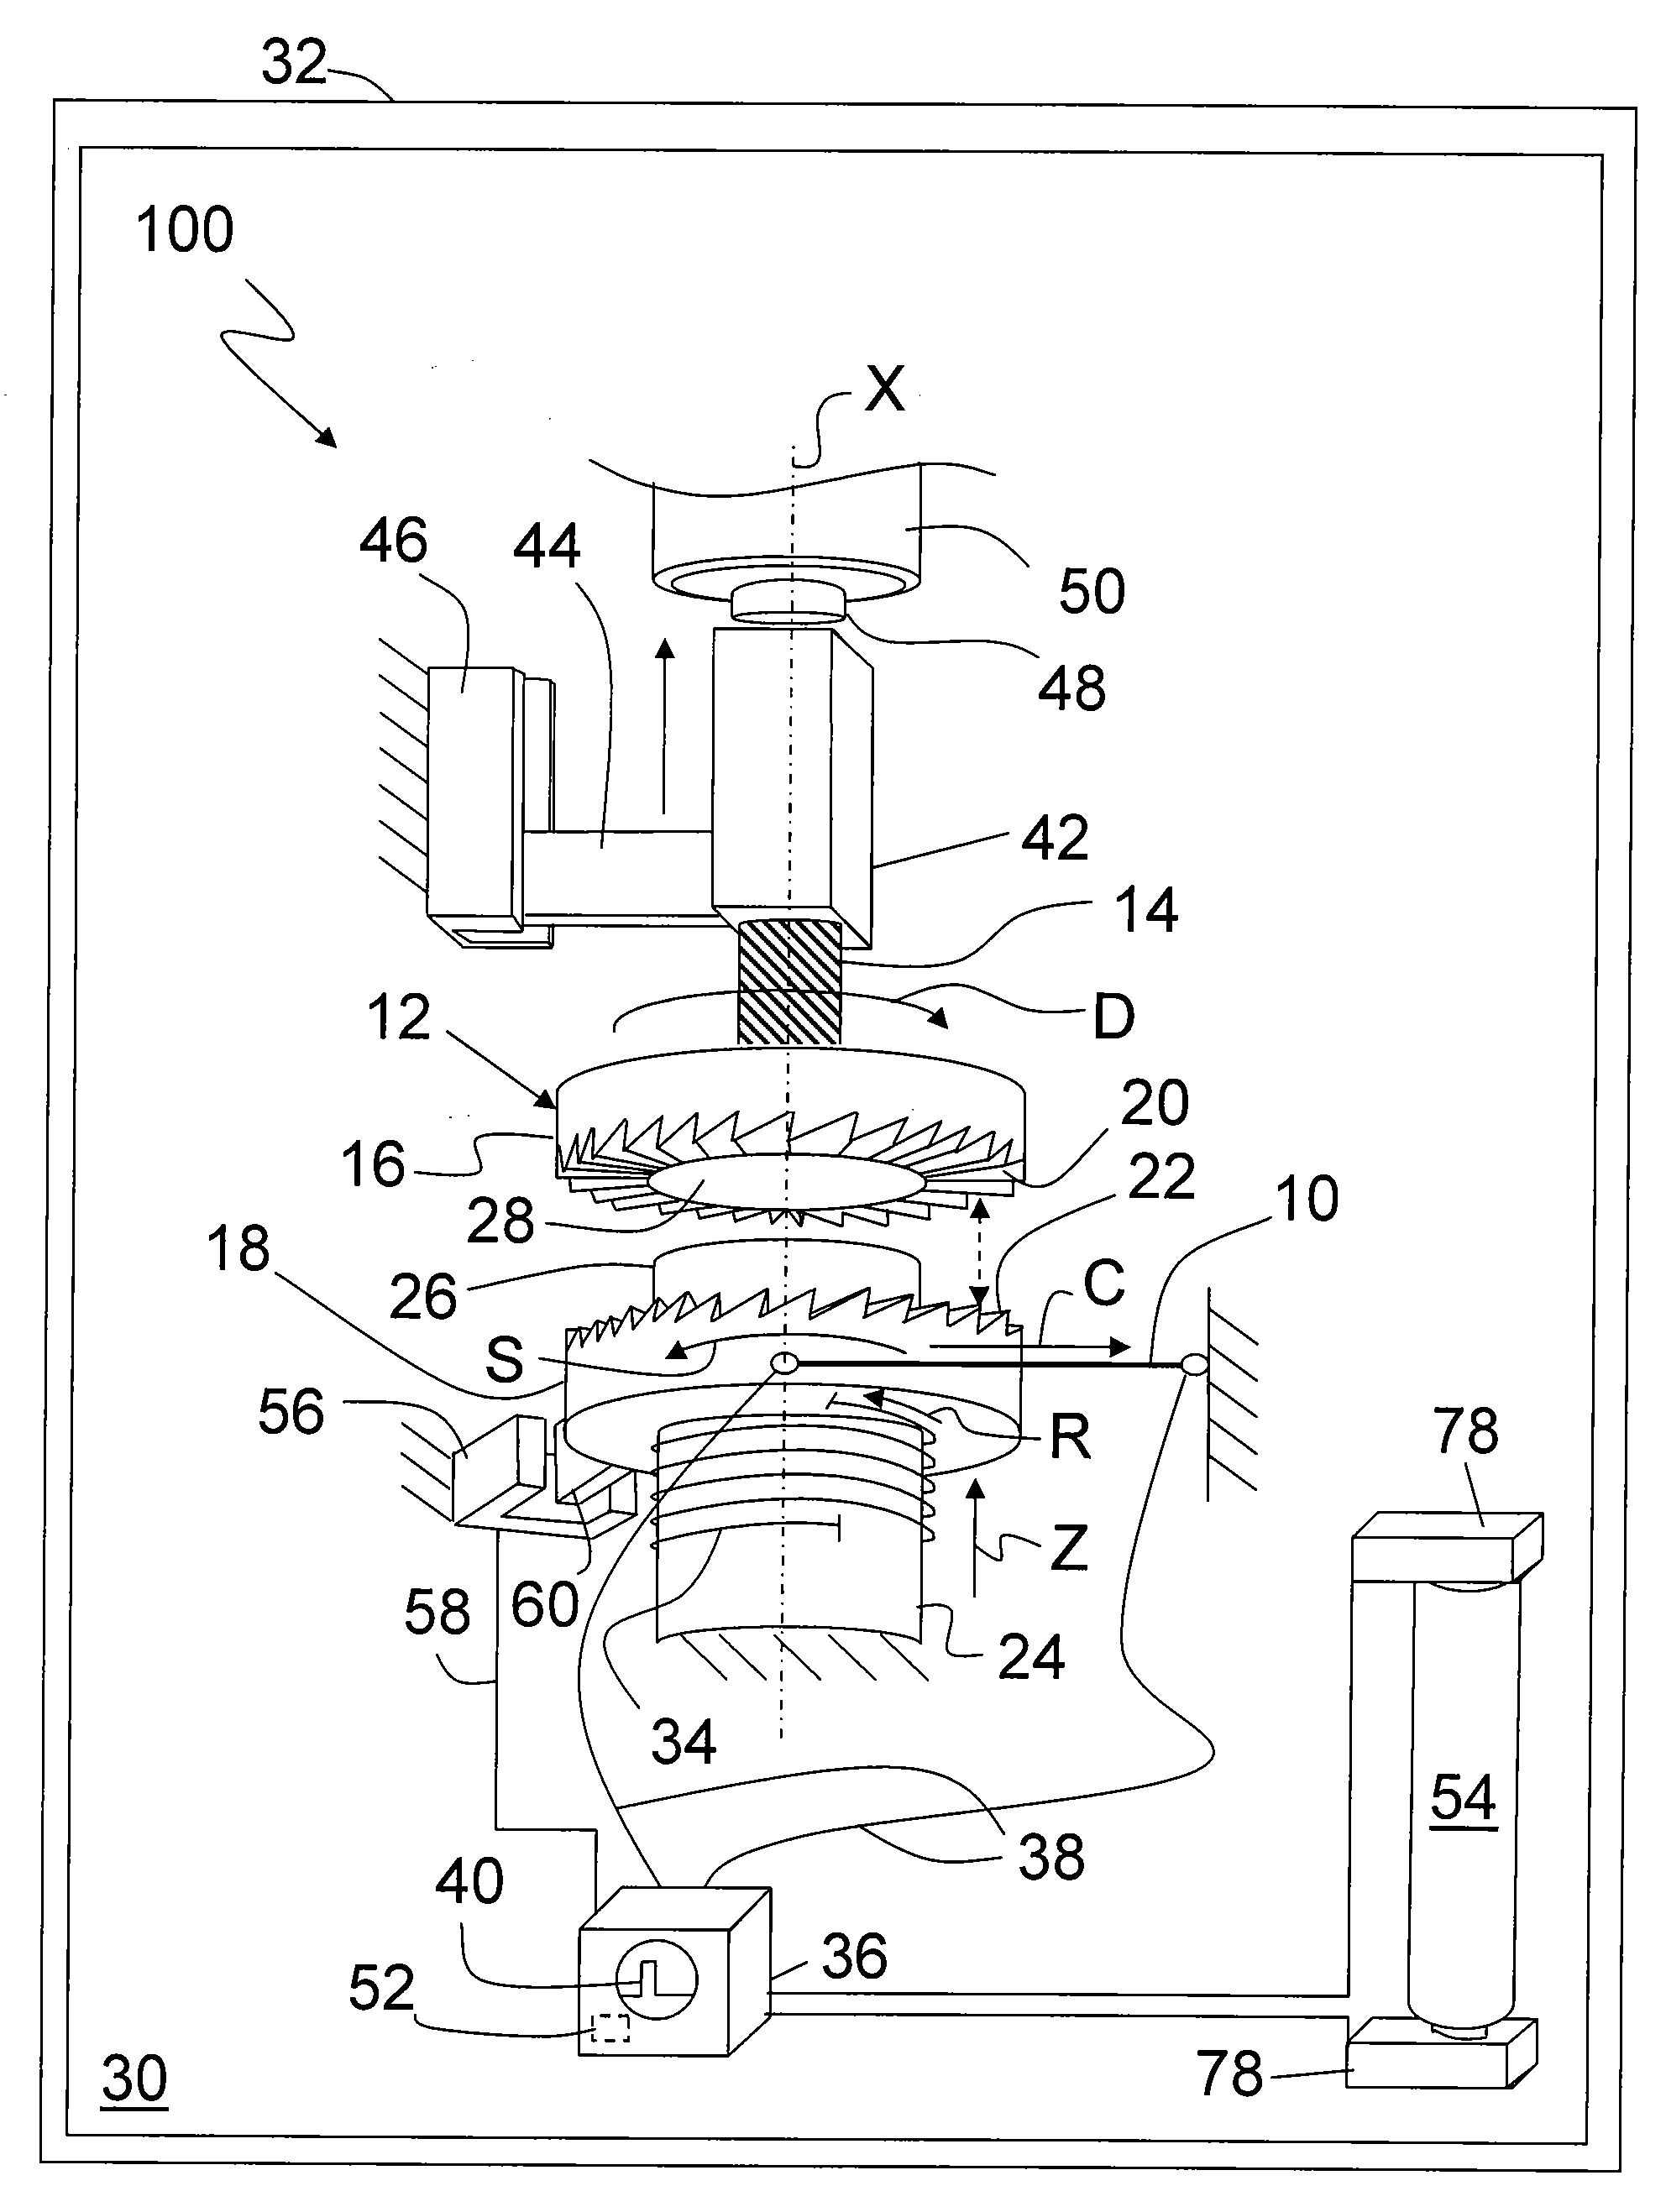 Lead screw delivery device using reusable shape memory actuator device